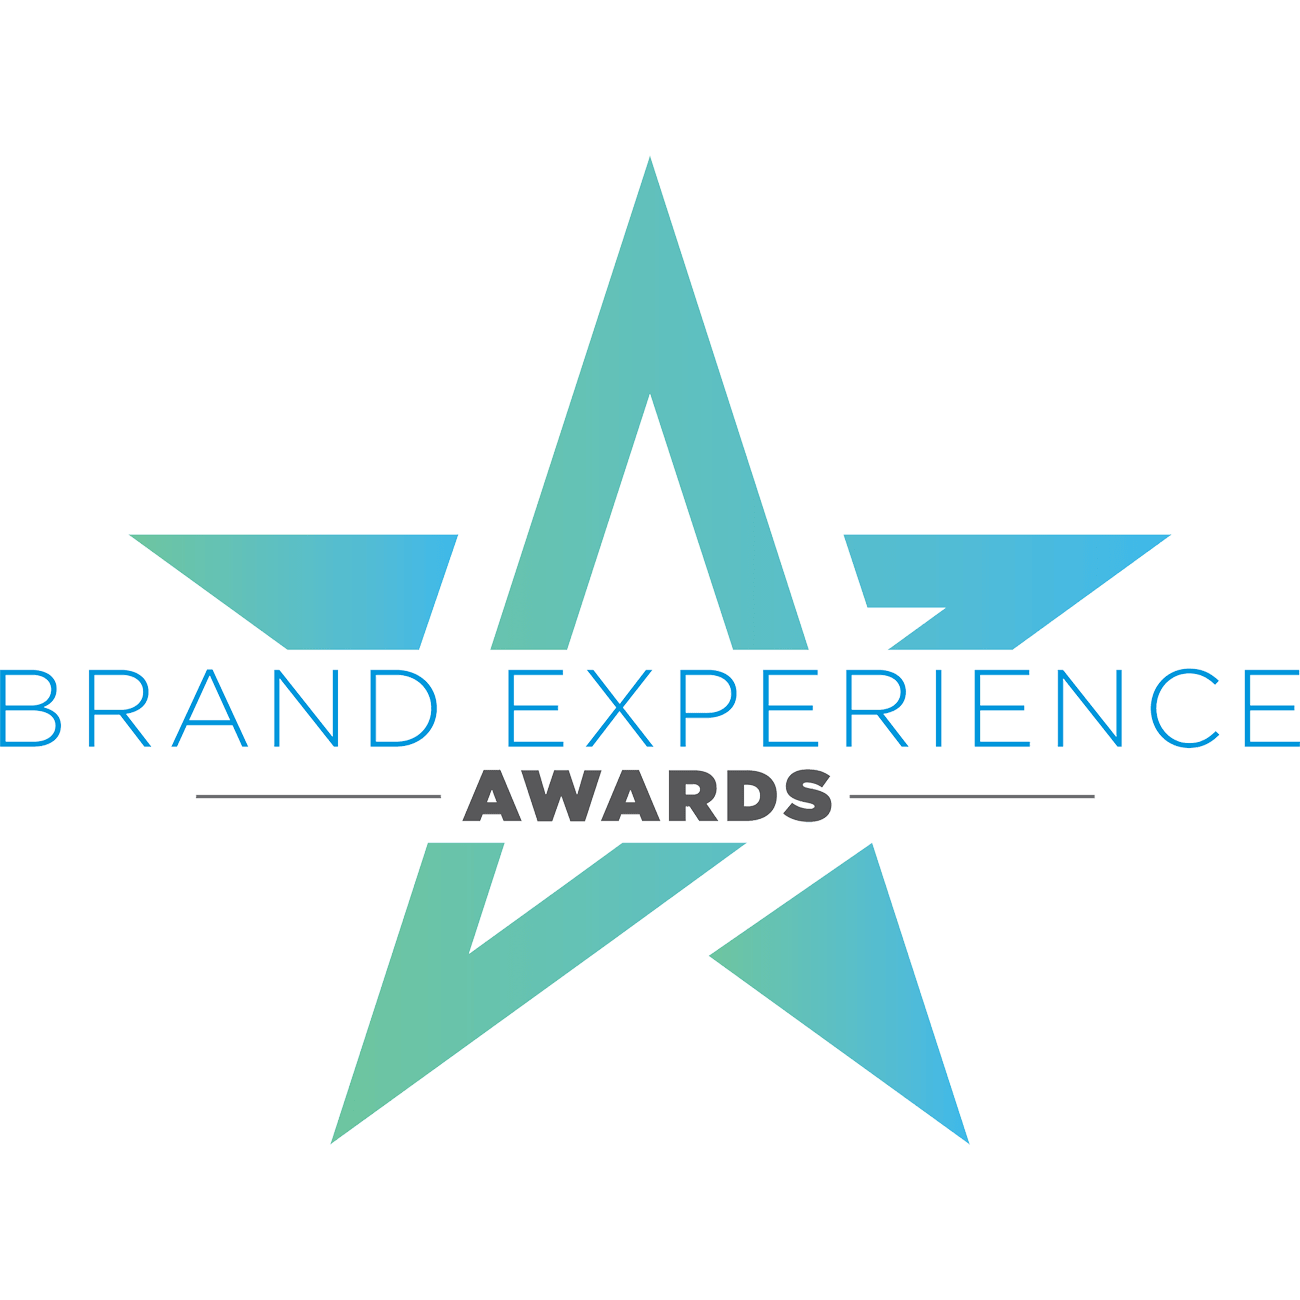 Brand Experience Awards by Retail Touchpoints for Last Mile & Fulfillment Experience